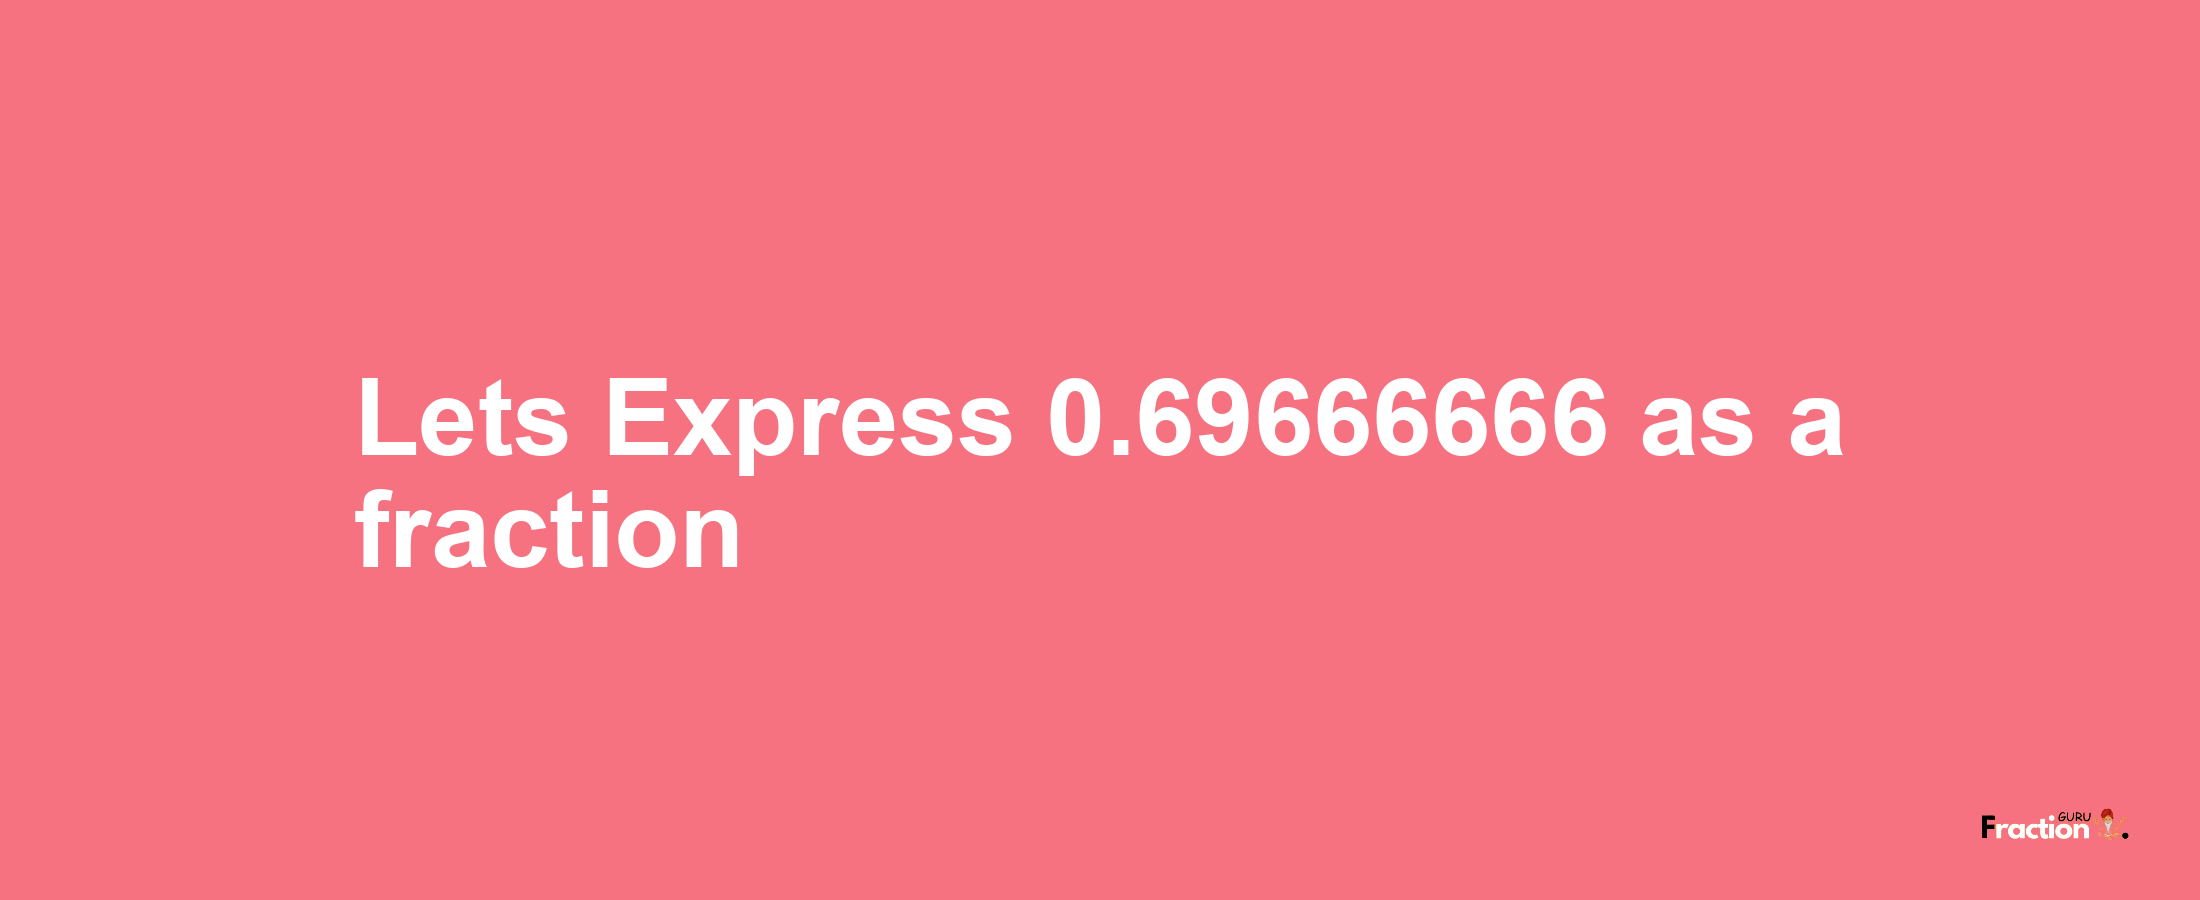 Lets Express 0.69666666 as afraction